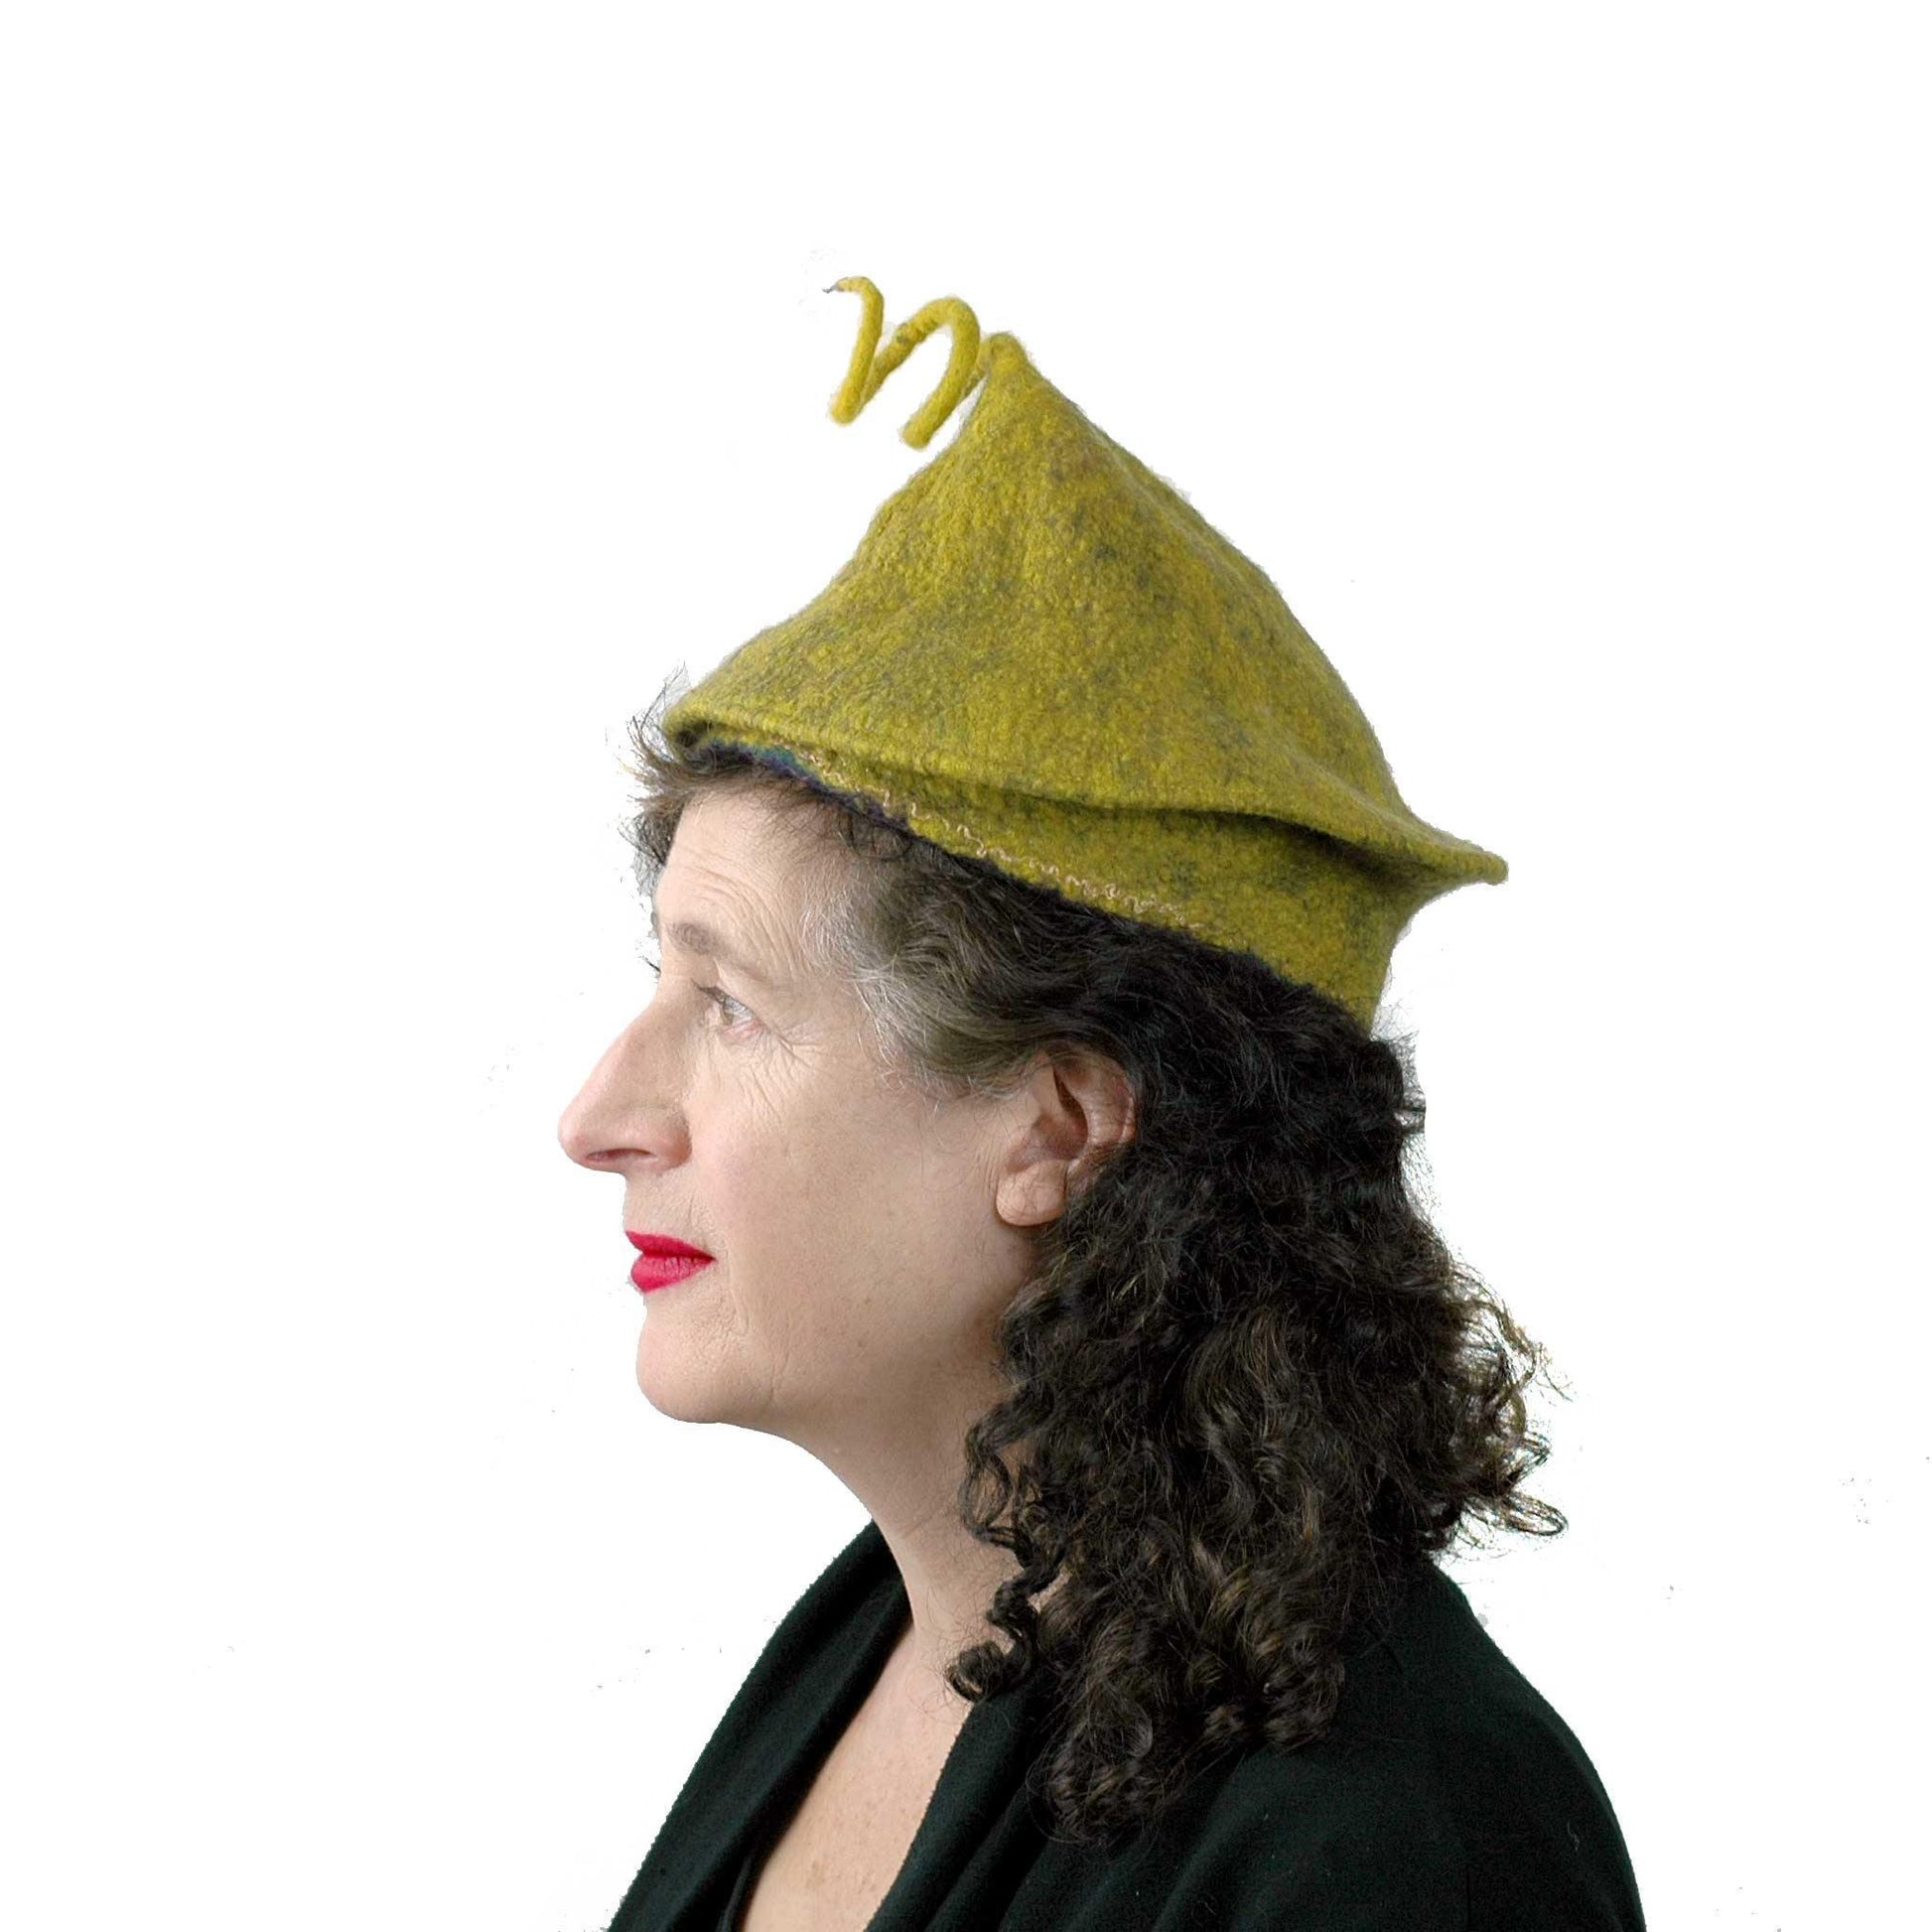 Curlicue Beret in Mustard Yellow - side view